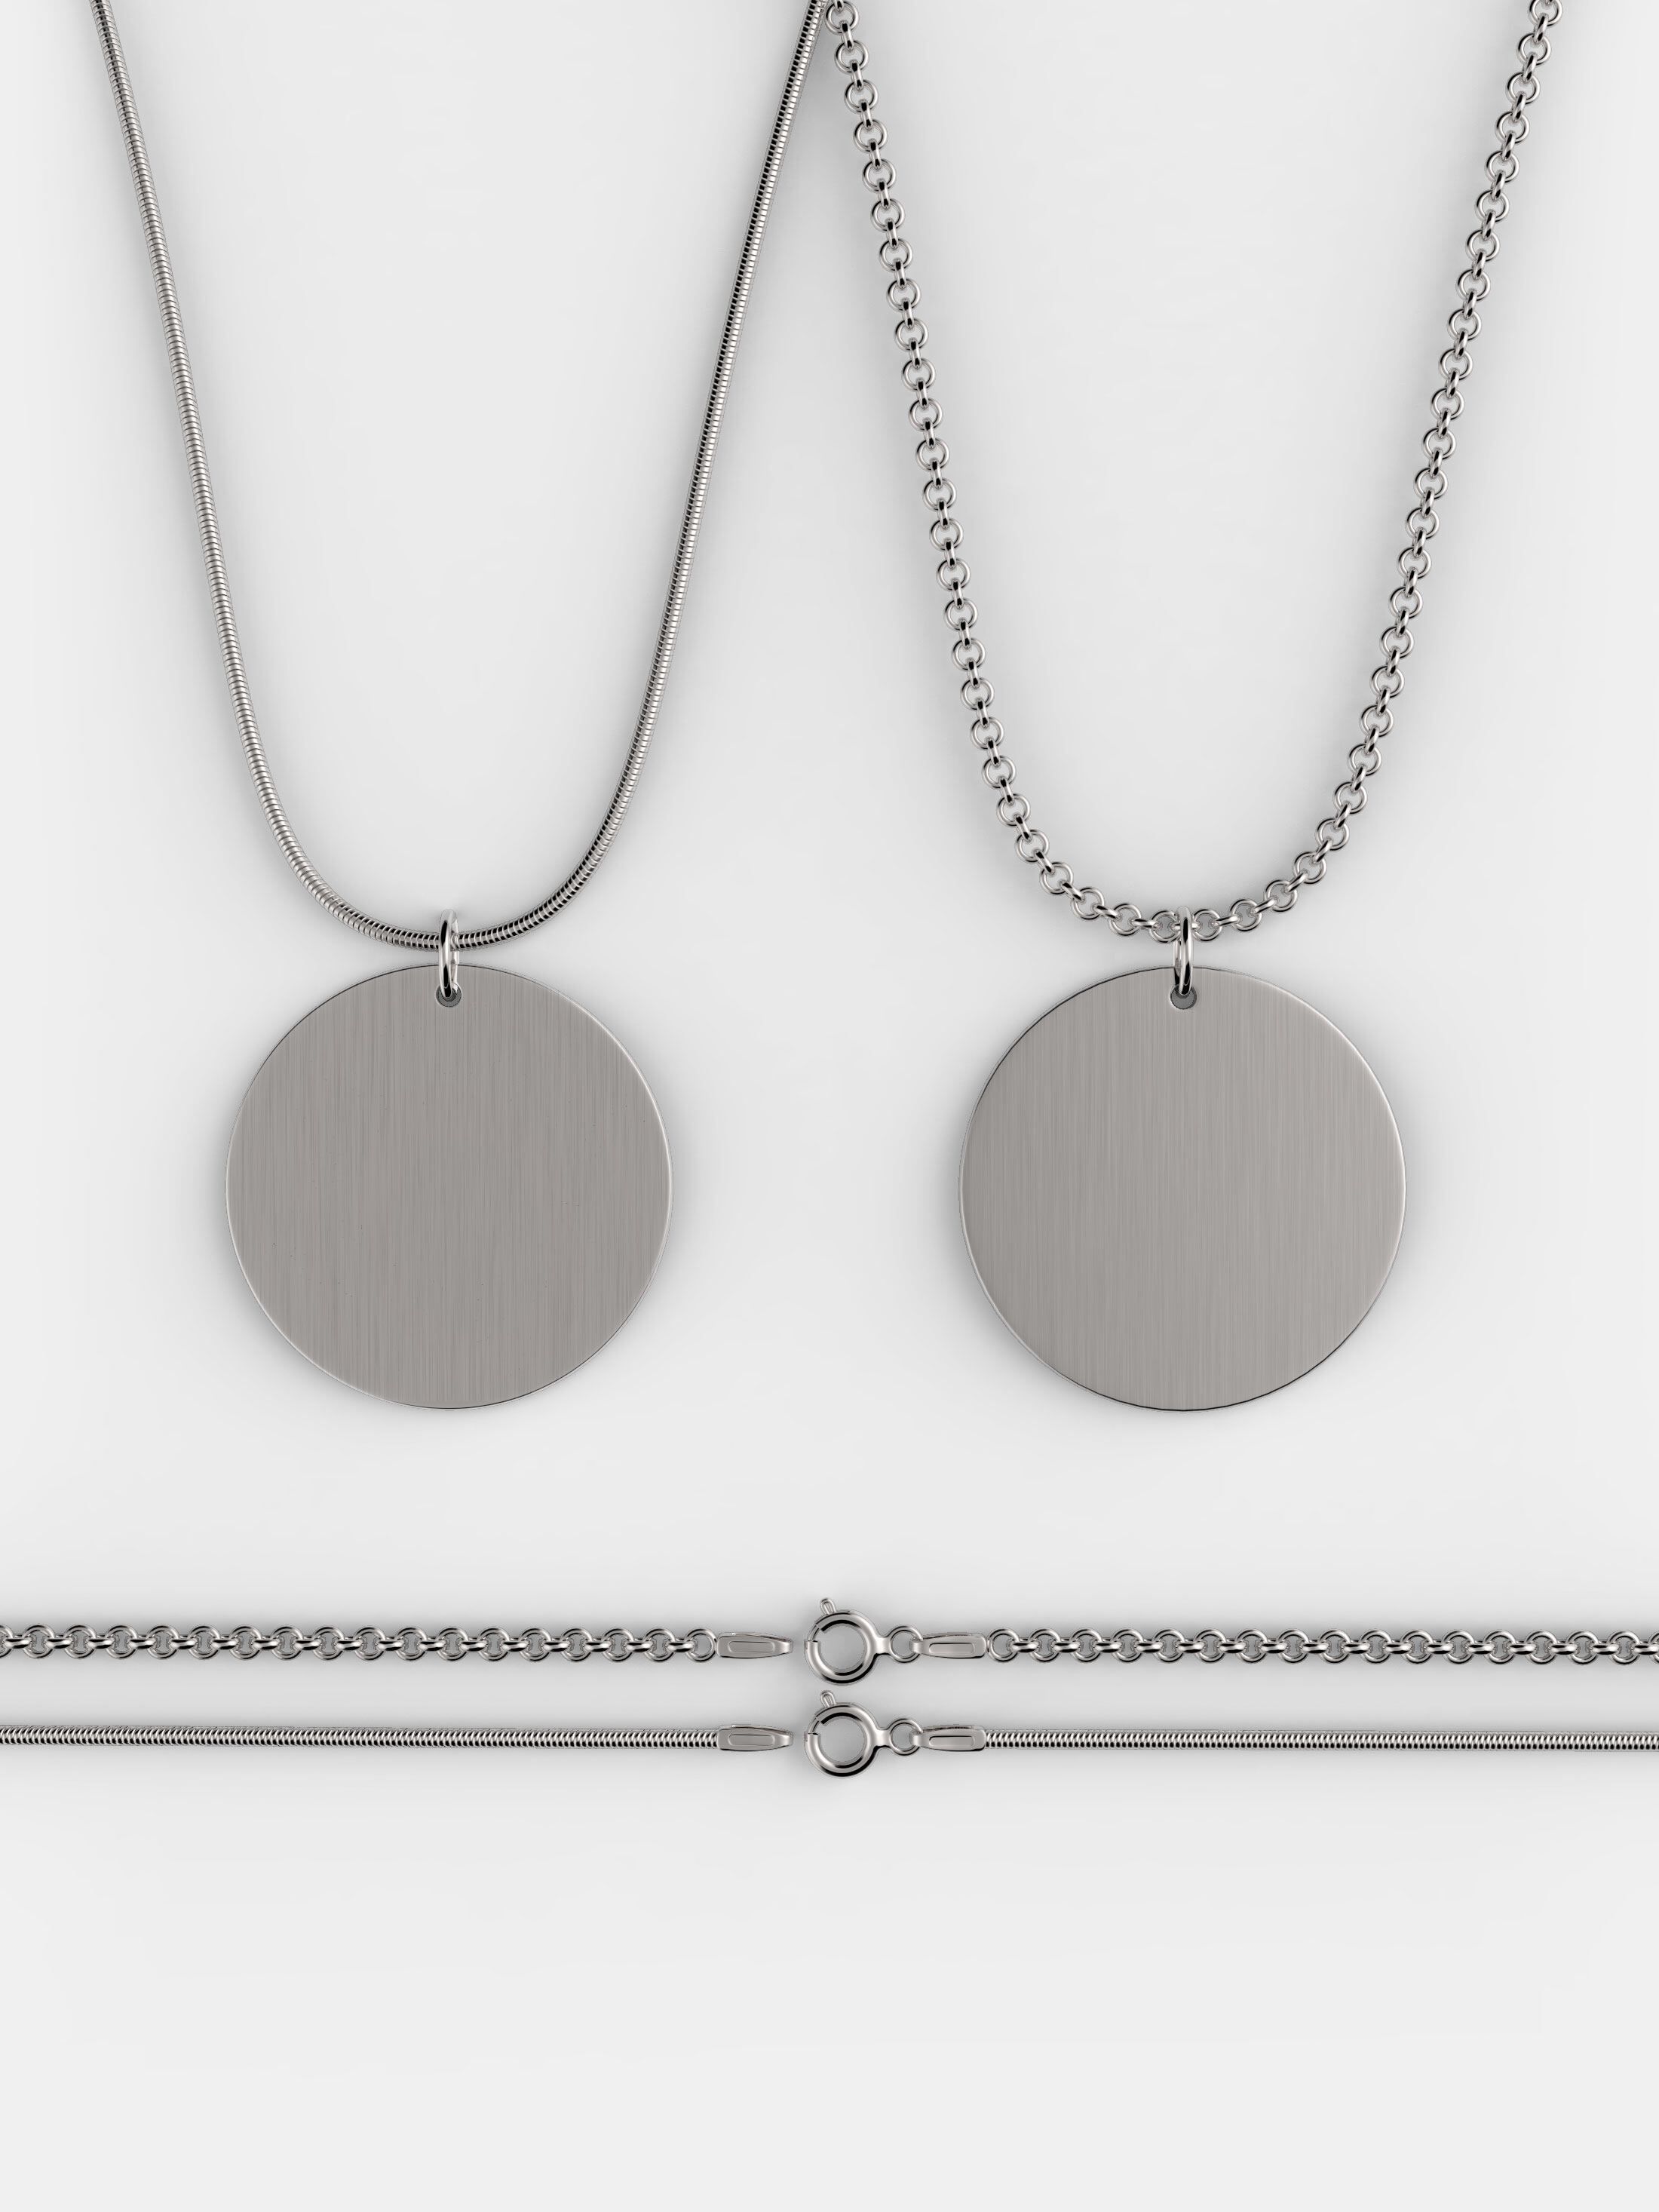 Bespoke silver necklace chain options